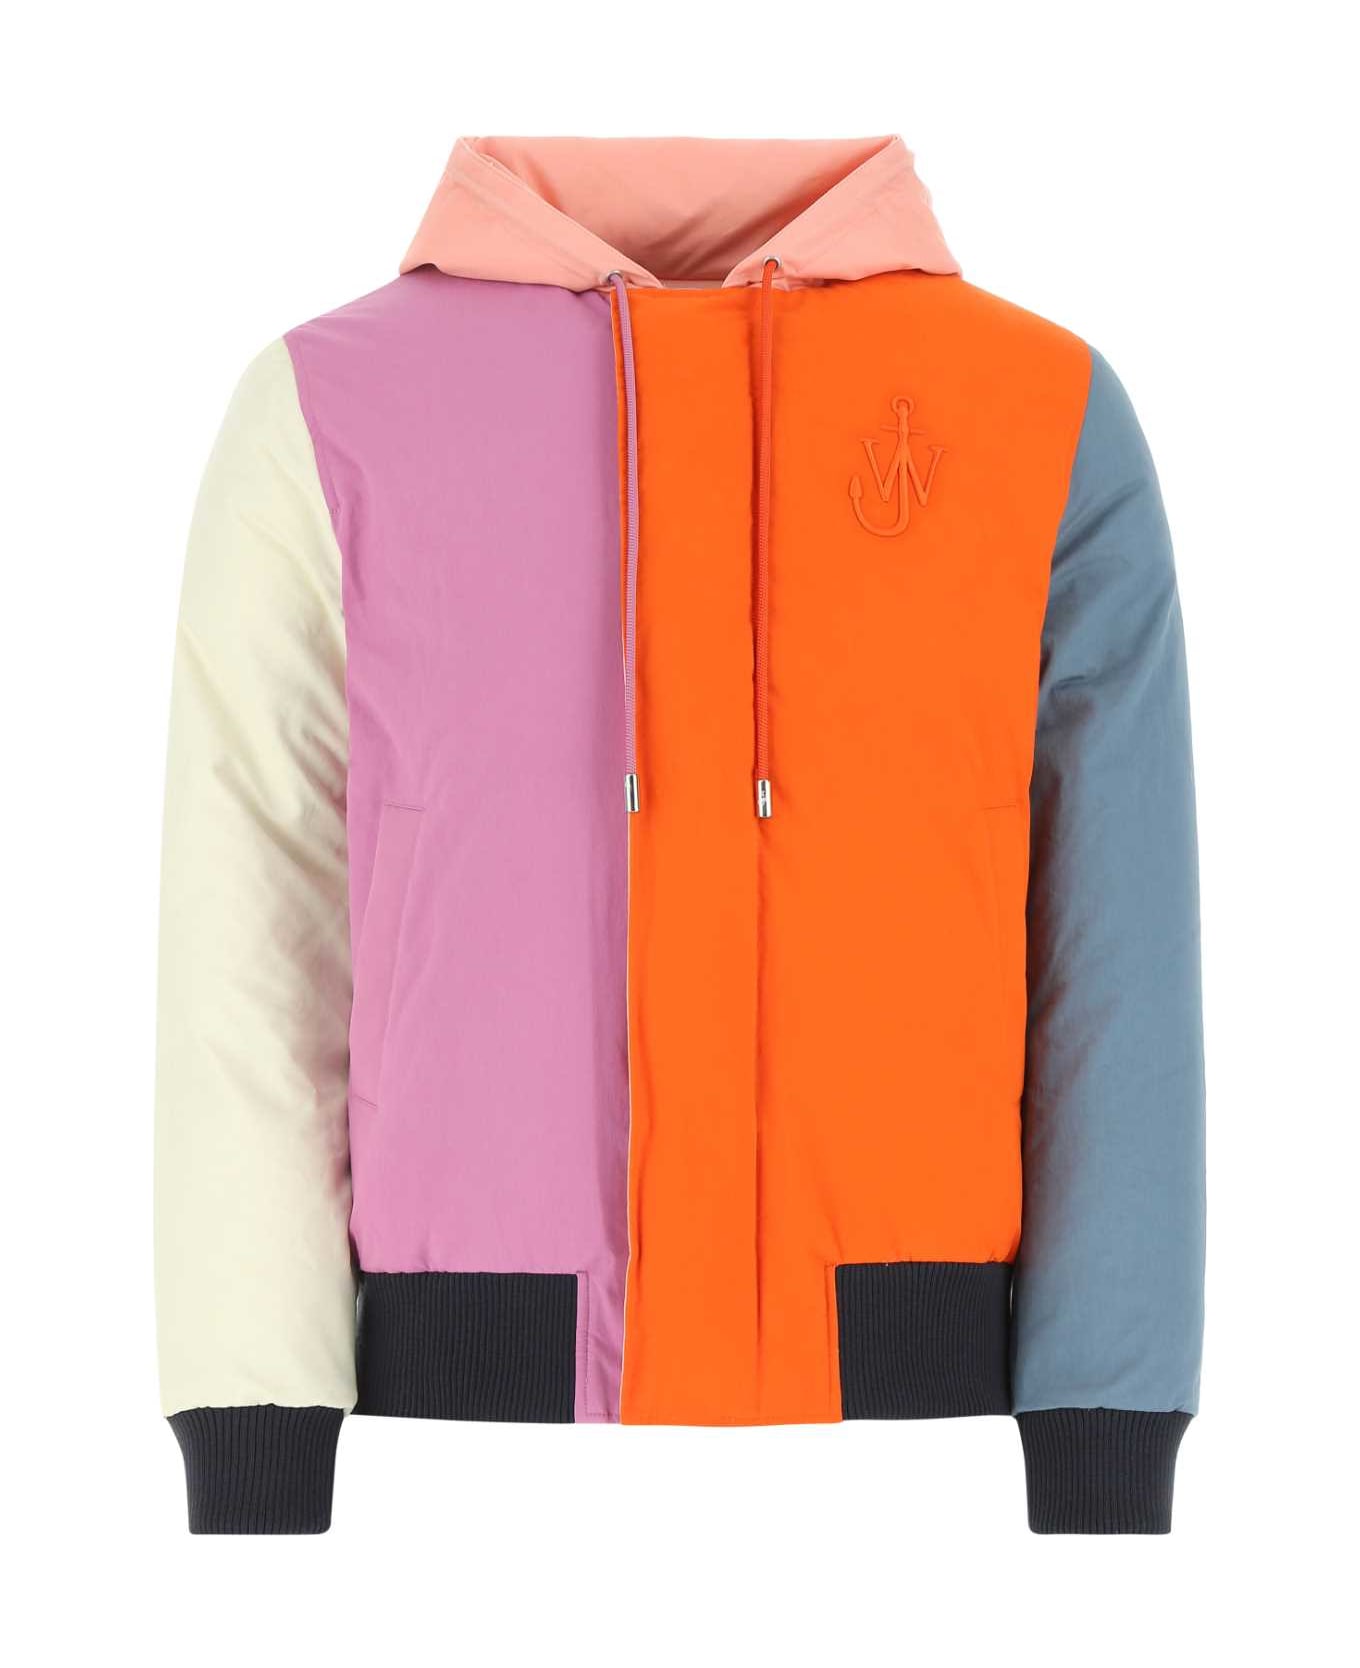 J.W. Anderson Multicolor Cotton Padded Jacket - 398